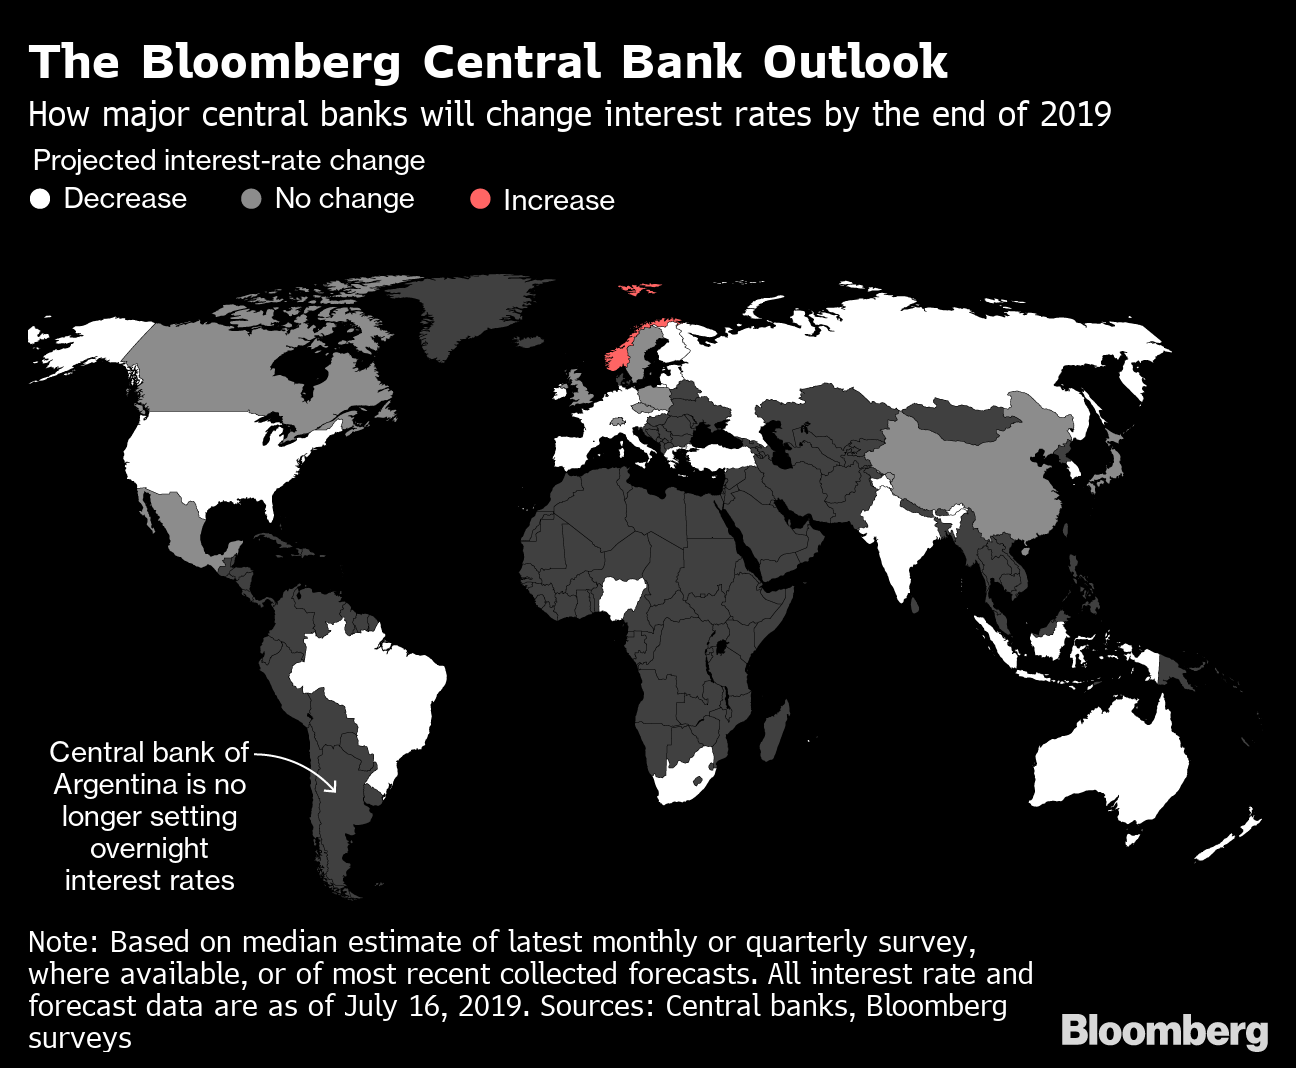 Bubble Trouble In Assets Looms For Central Banks Cutting Rates - or of most recent collected forecasts all interest rate and forecast data are as of july 16 20!   19 sources central banks bloomberg surveys